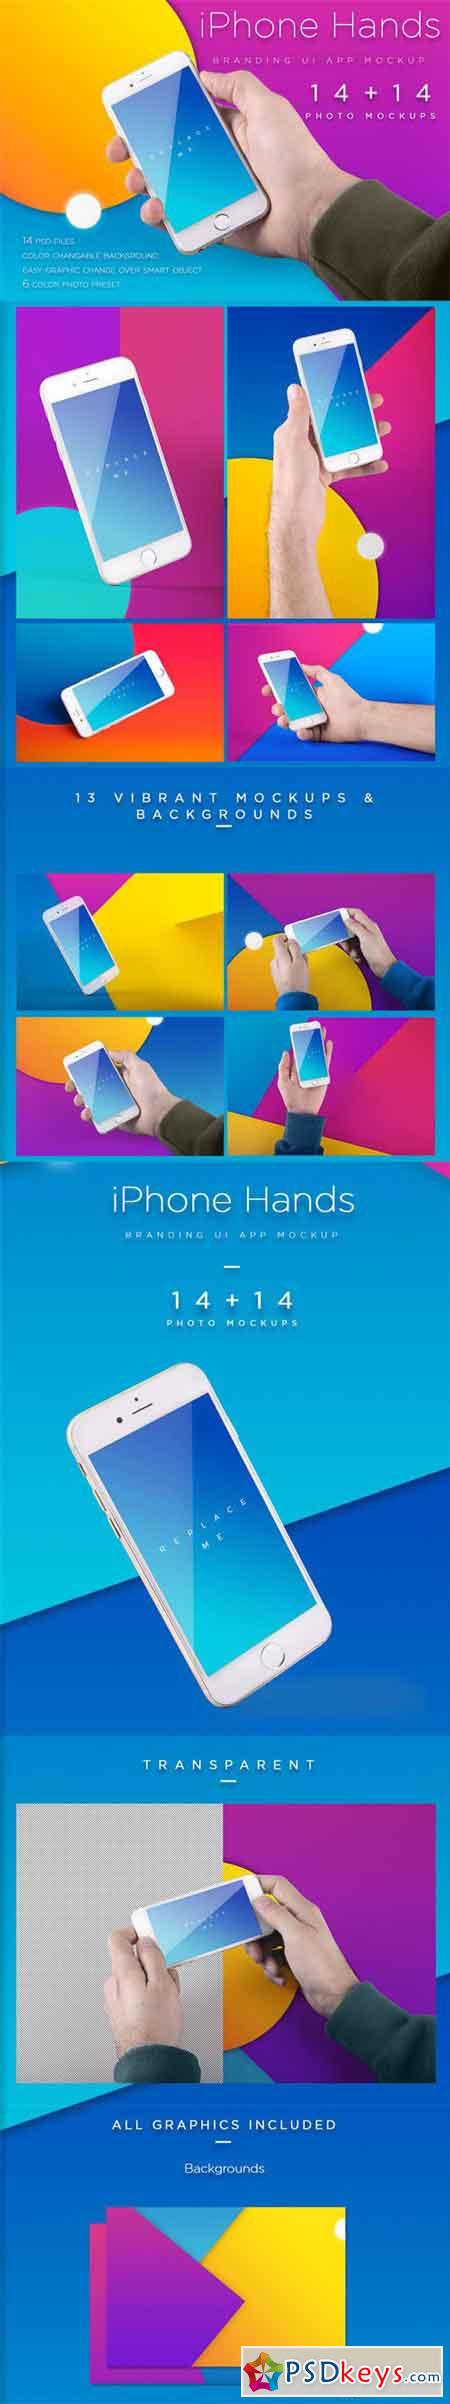 Iphone Page 11 Free Download Photoshop Vector Stock Image Via Torrent Zippyshare From Psdkeys Com